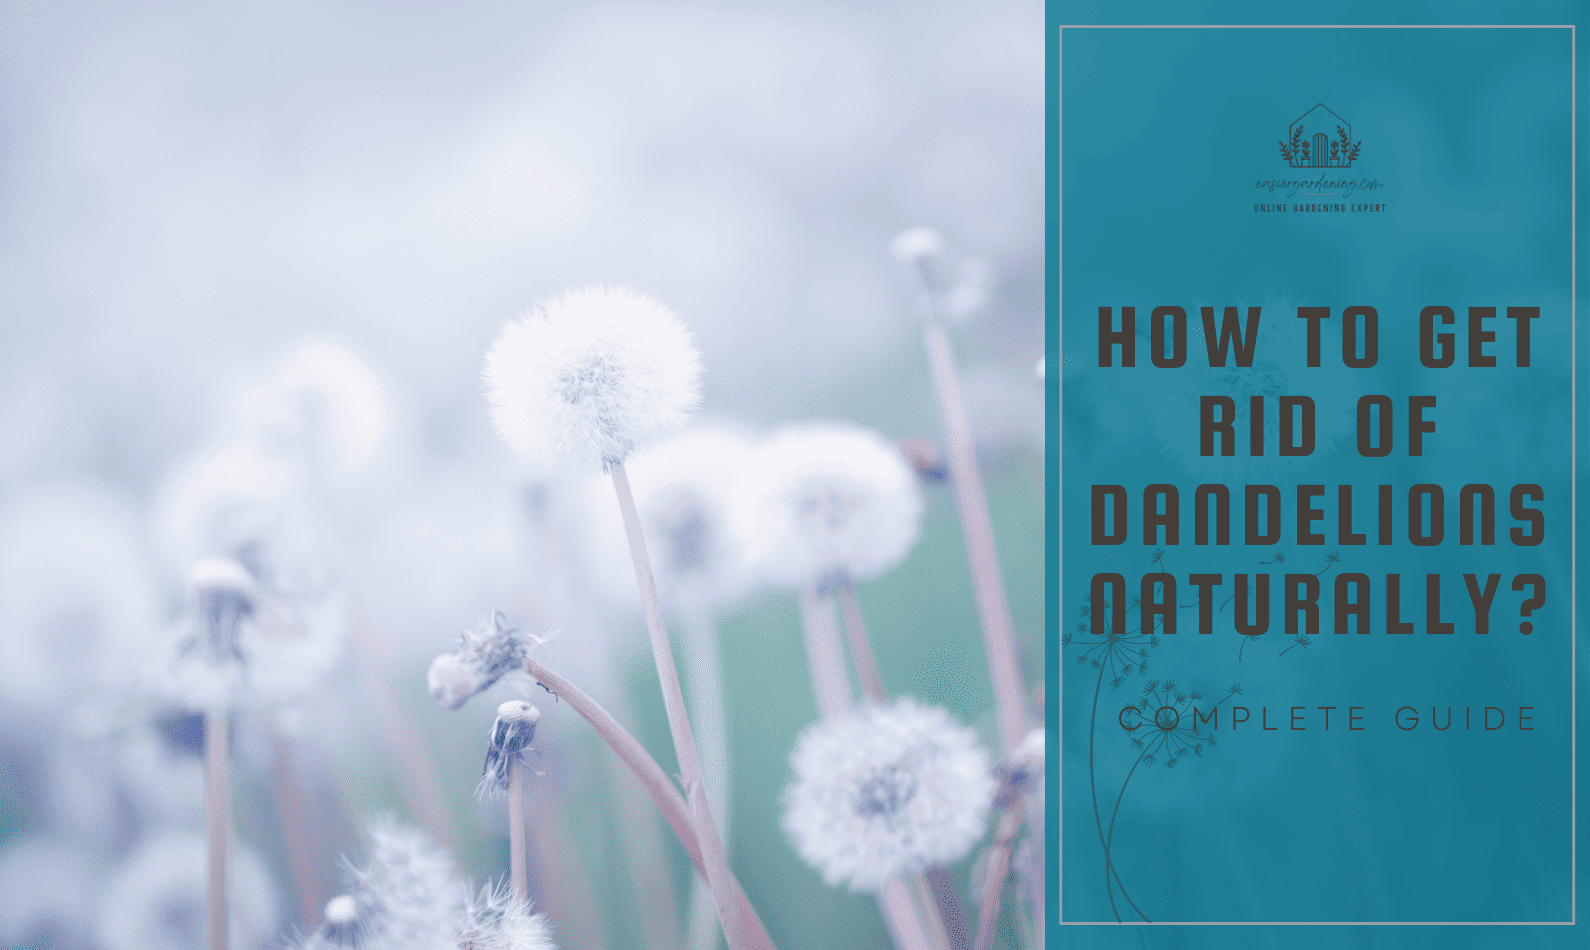 How to Get Rid of Dandelions Naturally?